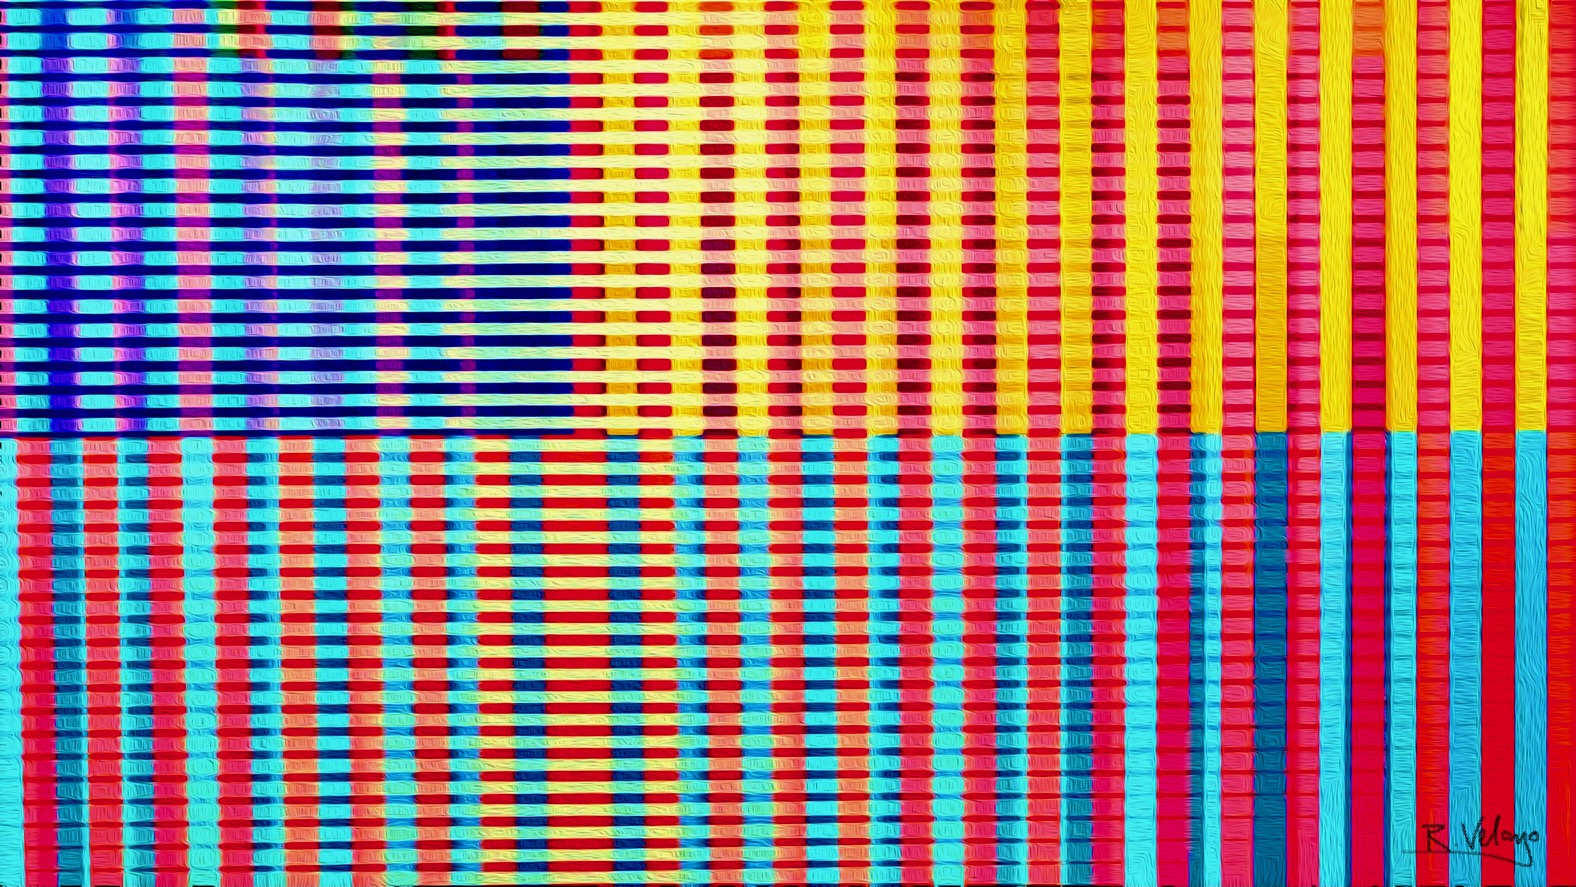 "GRID OF COLORS AND STRIPES" [Created: 7/22/2021]